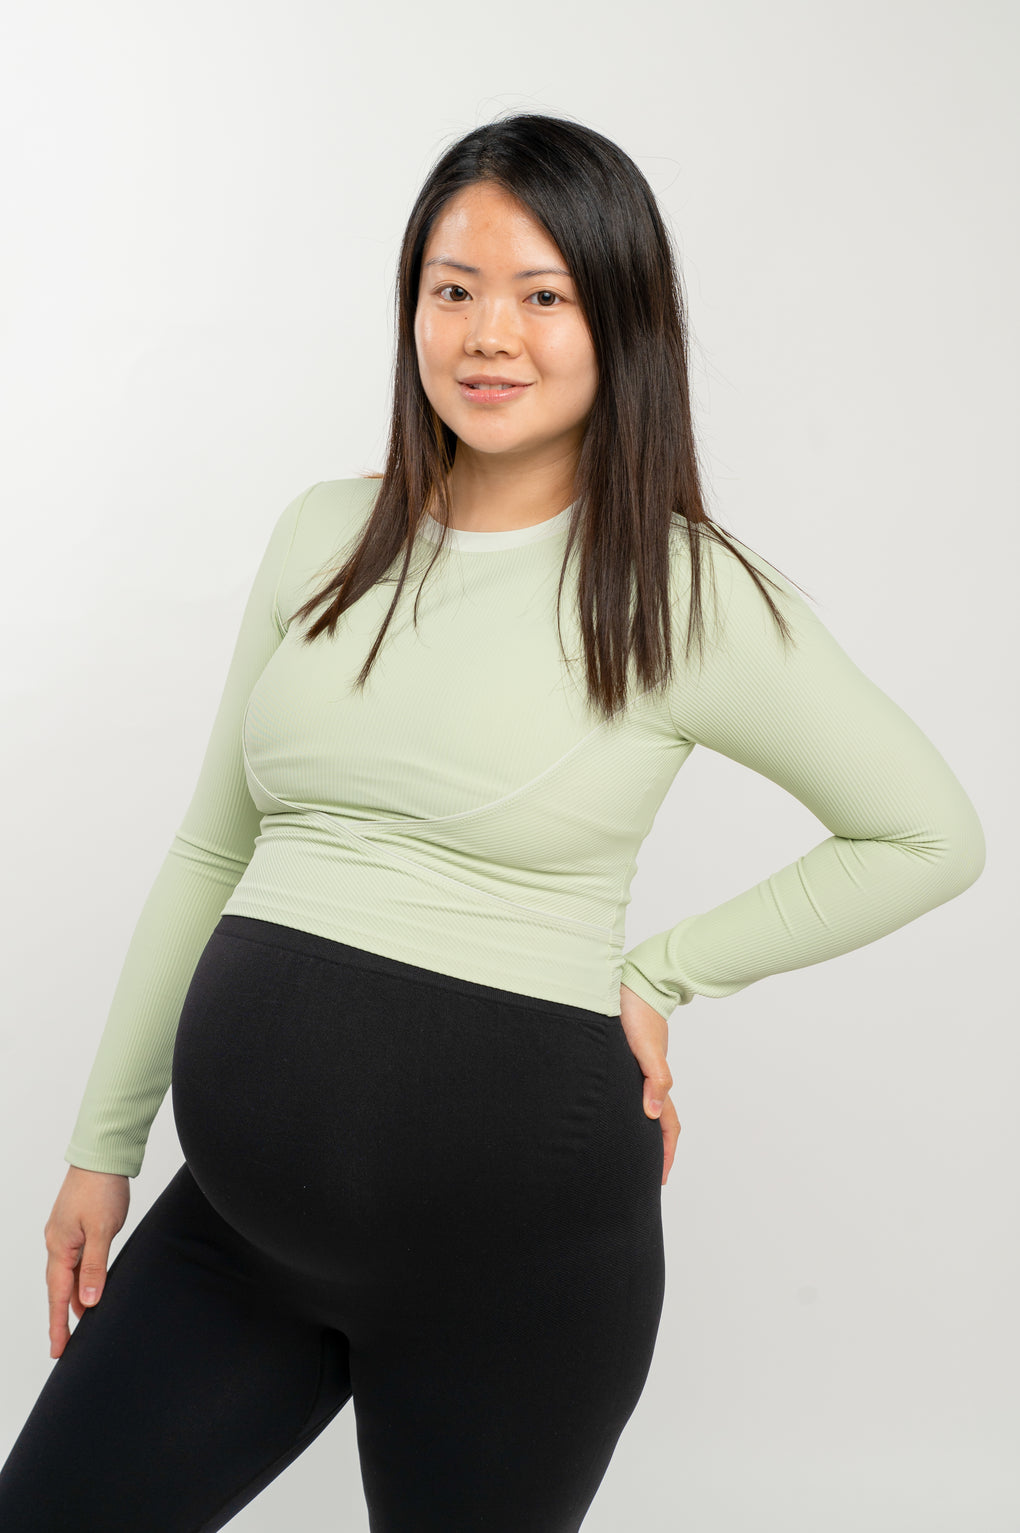 Women's Maternity Leggings Seamless Belly Compression Pregnancy